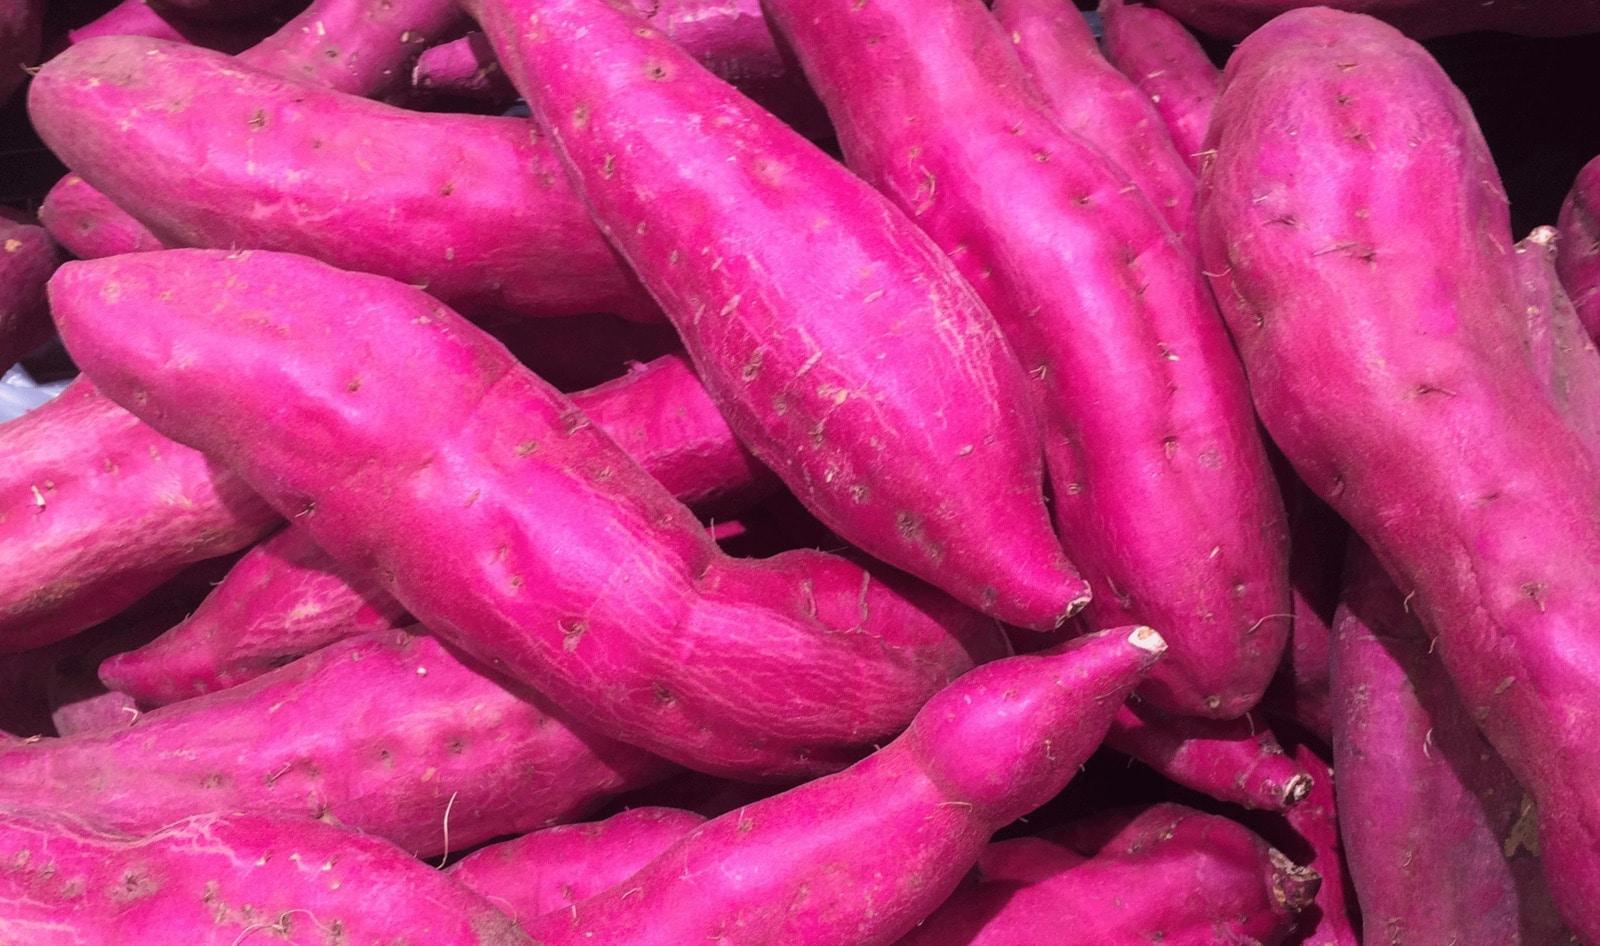 Fiery Red Sweet Potatoes to Replace Crushed Insect Bodies as Food Coloring